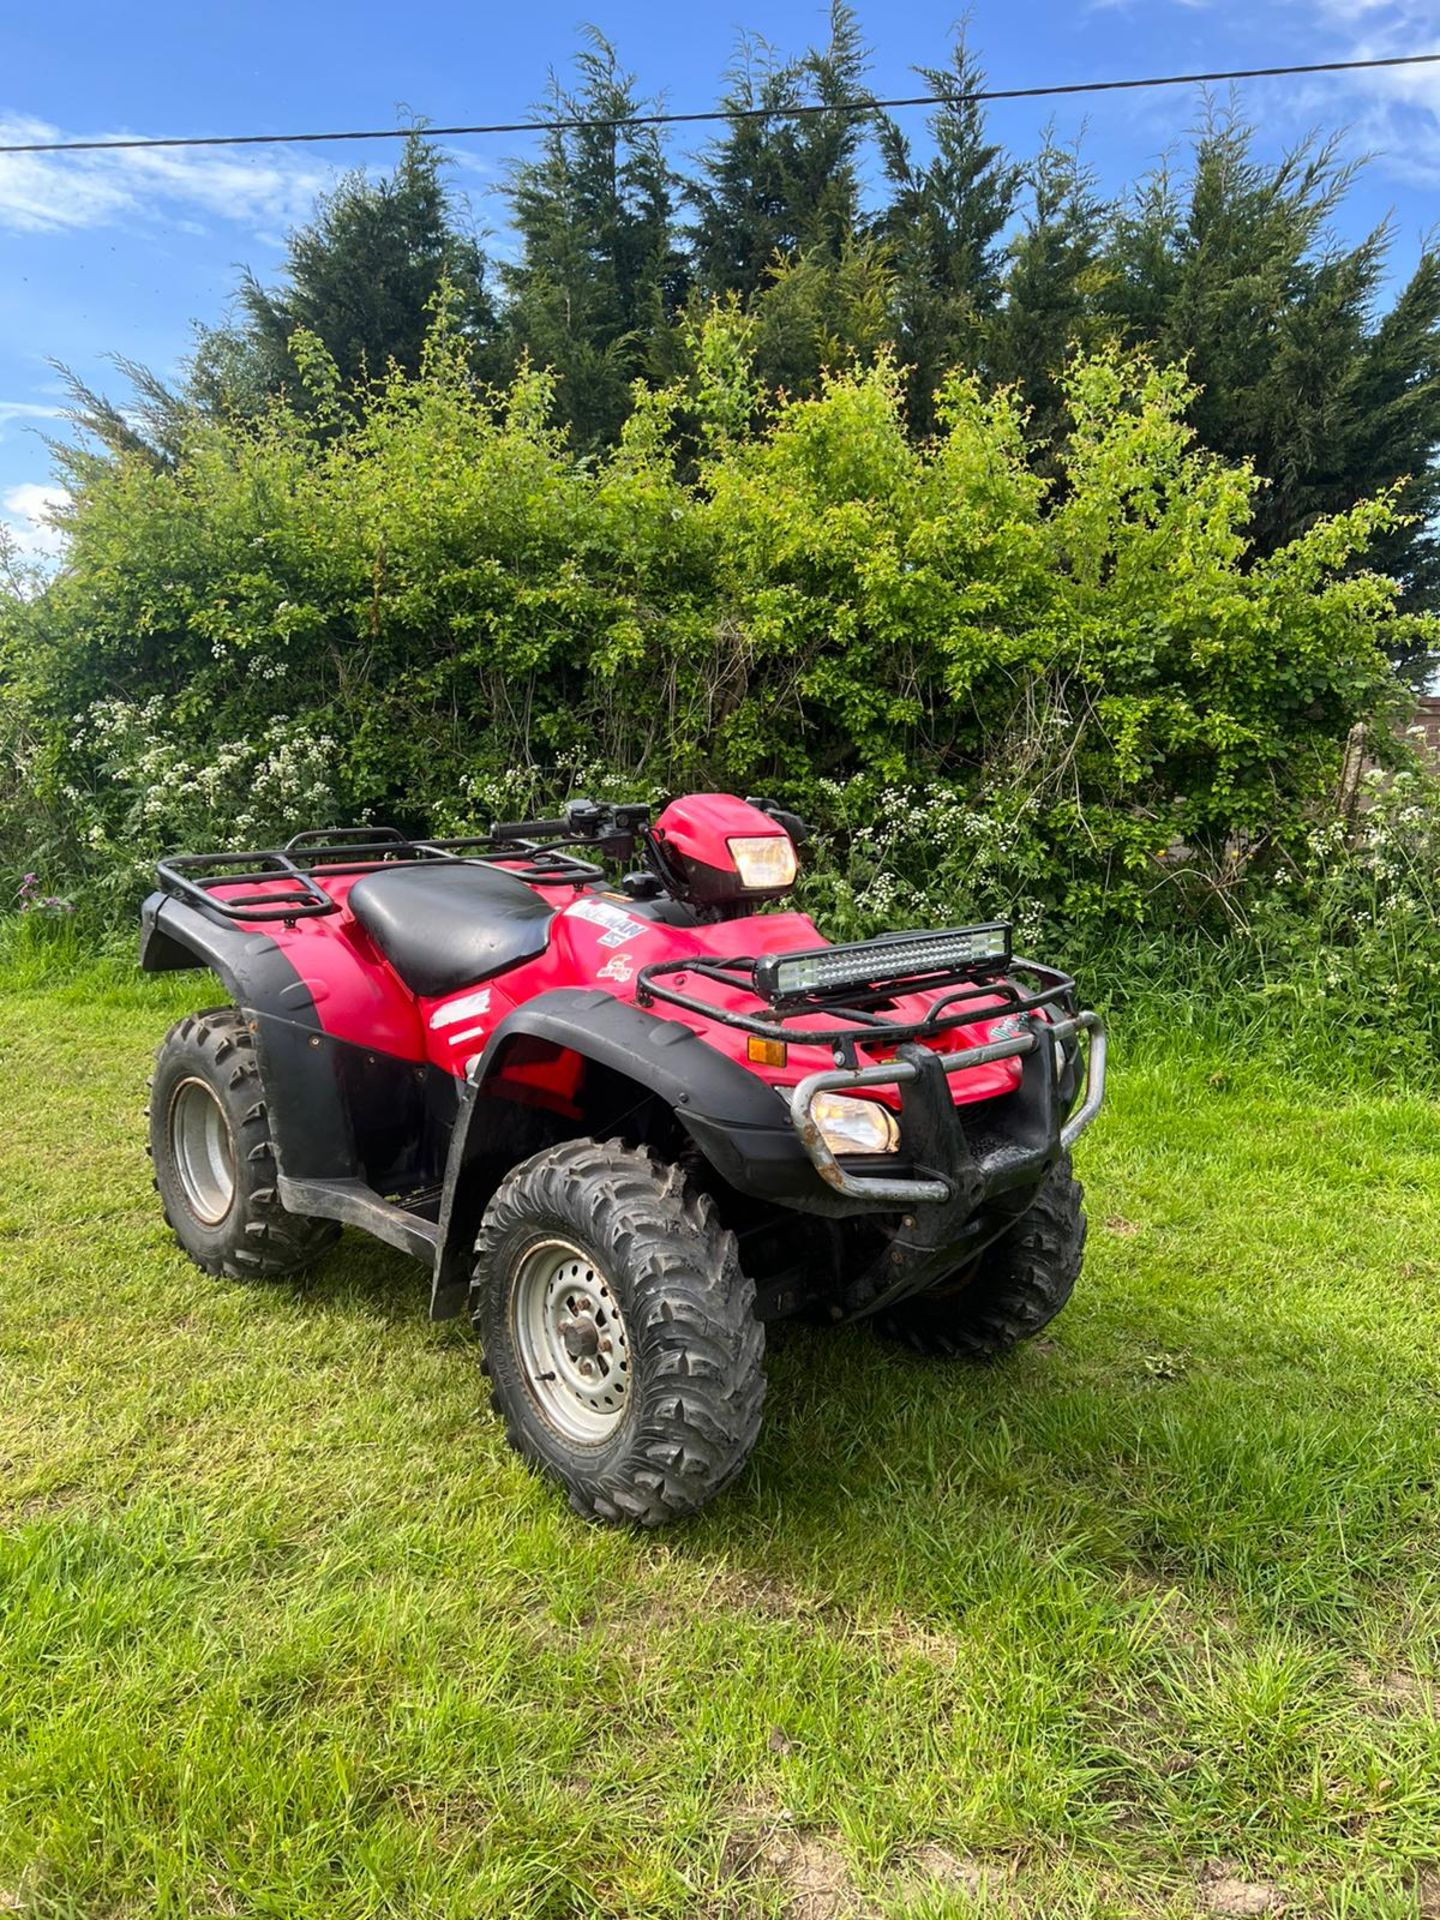 HONDA FORMAN 500 FARM QUAD, SELECTABLE 2 and 4 WHEEL DRIVE, IN GOOD CONDITION "PLUS VAT" - Image 2 of 12